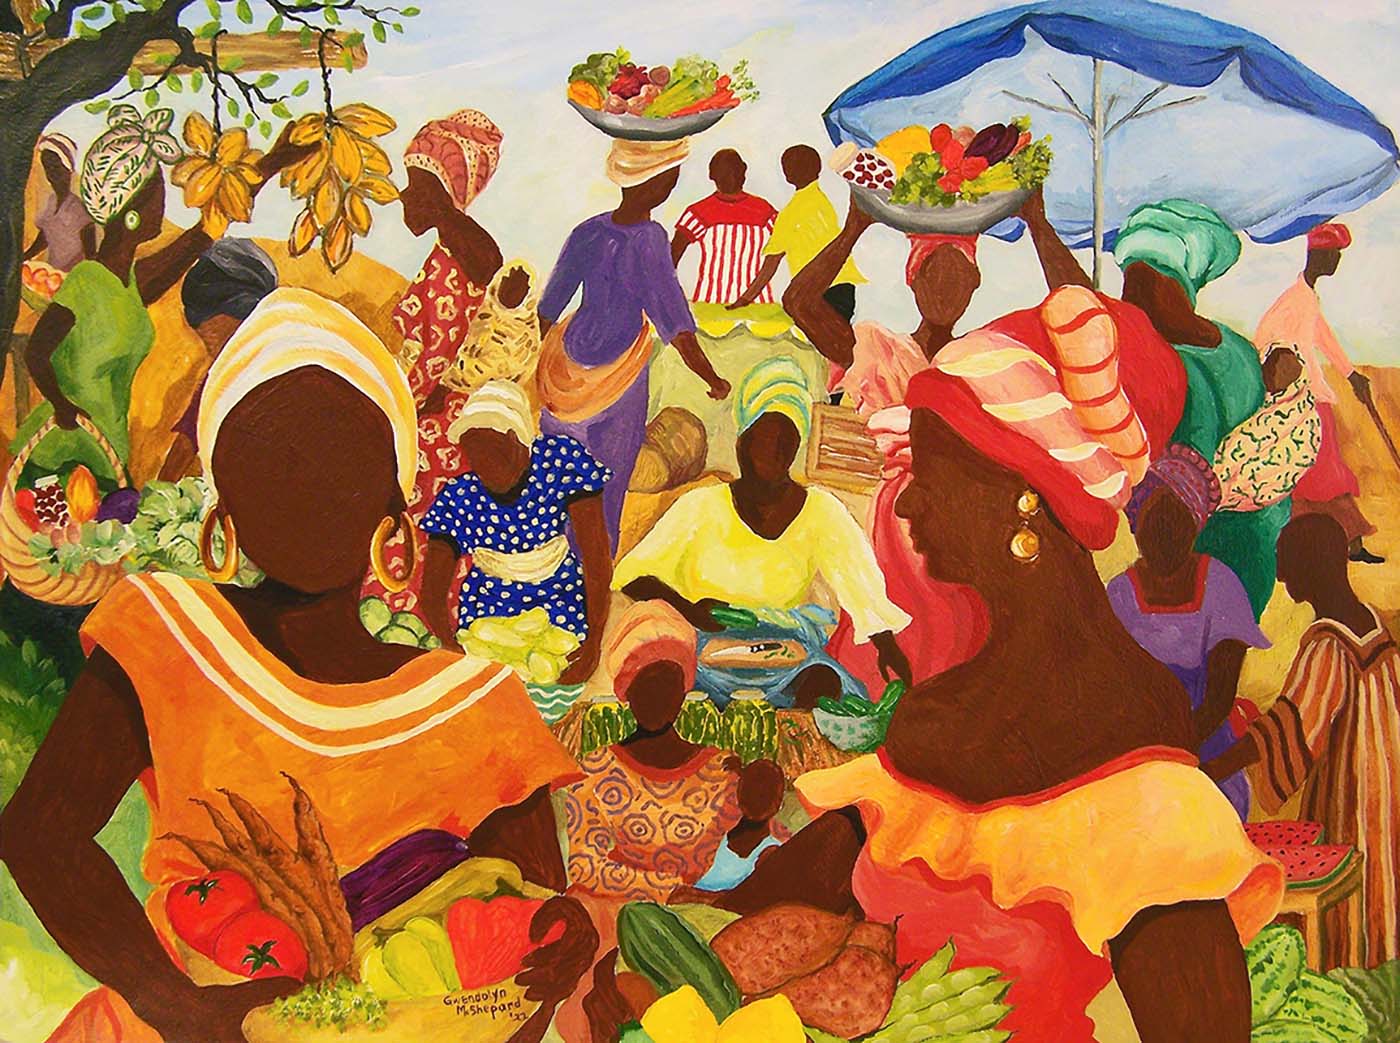 To Market People Of Color Jigsaw Puzzle